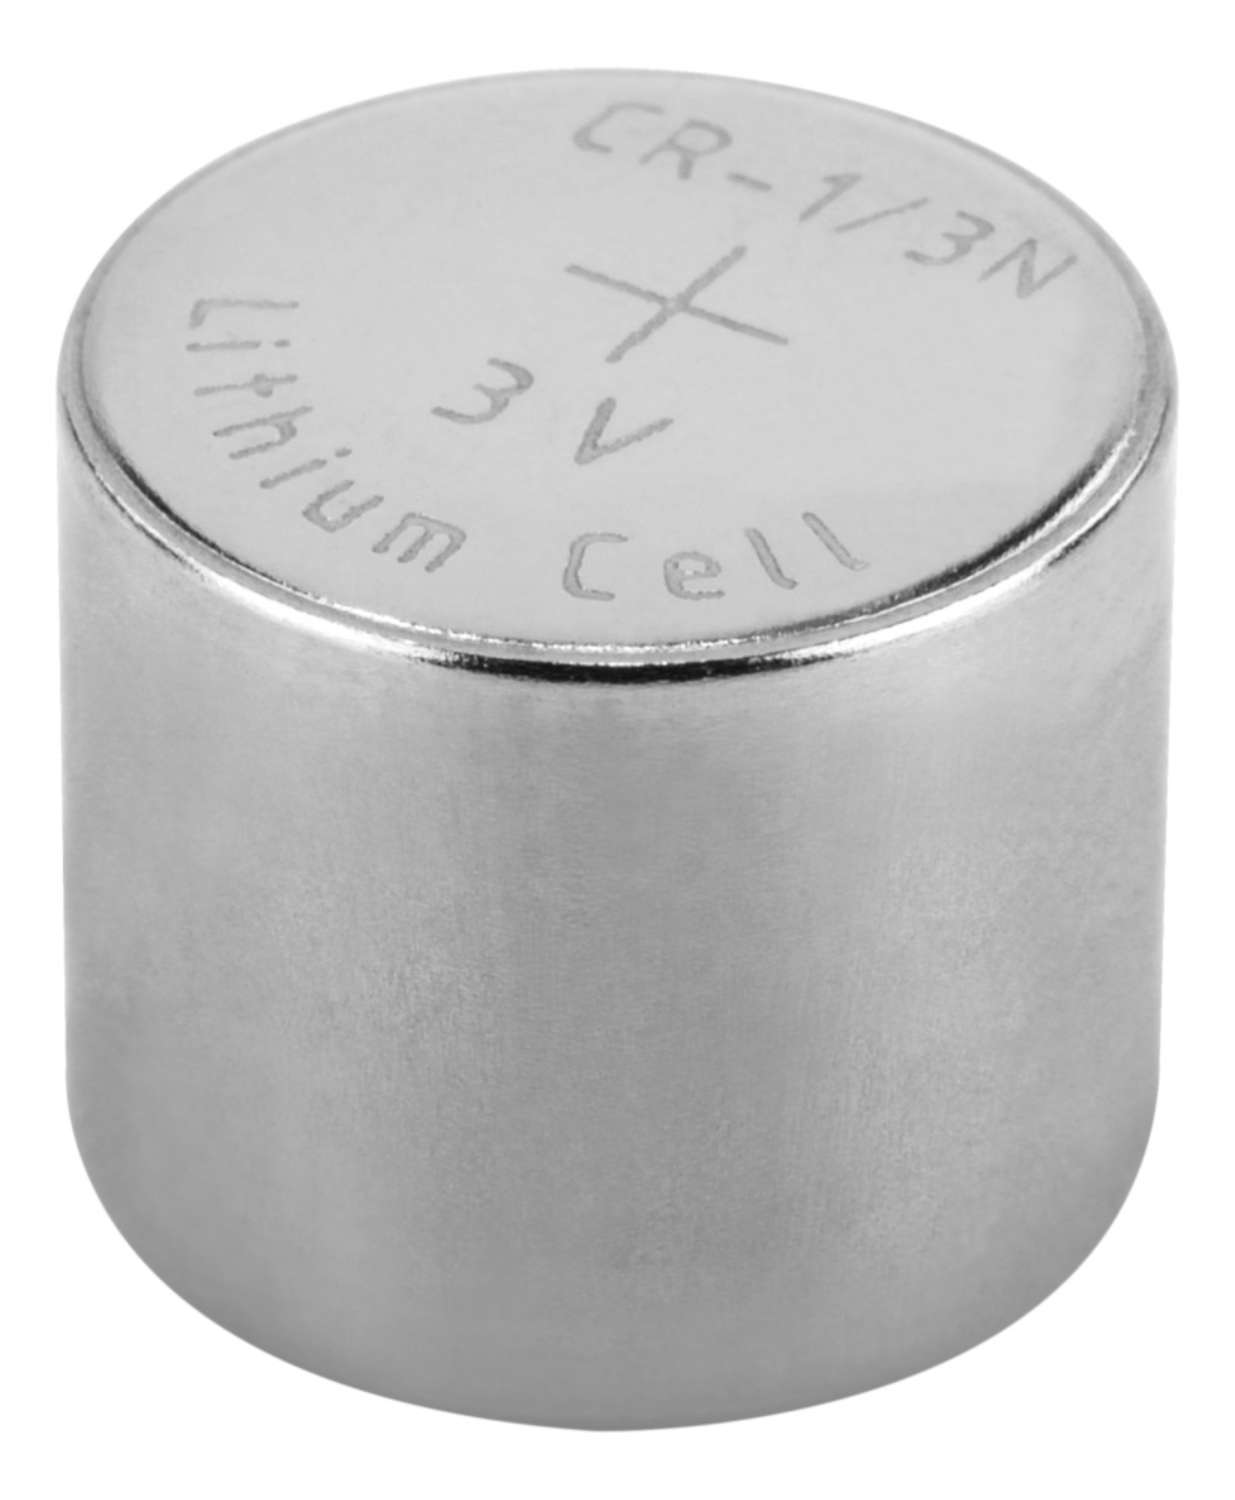 3V CR1/3N / CR11108 / 2L76 Lithium Button Cell Battery